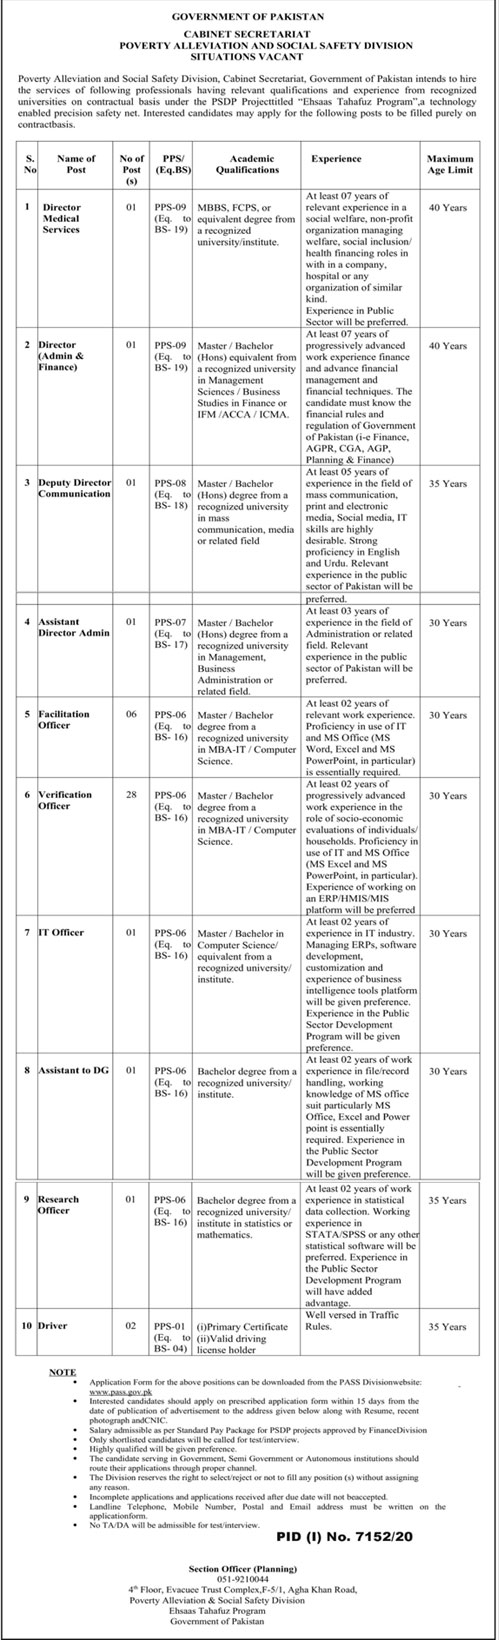 Government Jobs in Cabinet Secretariat Pakistan for Poverty Alleviation and Social Safety Division for the posts of Director, Assistant, etc. in June 2021